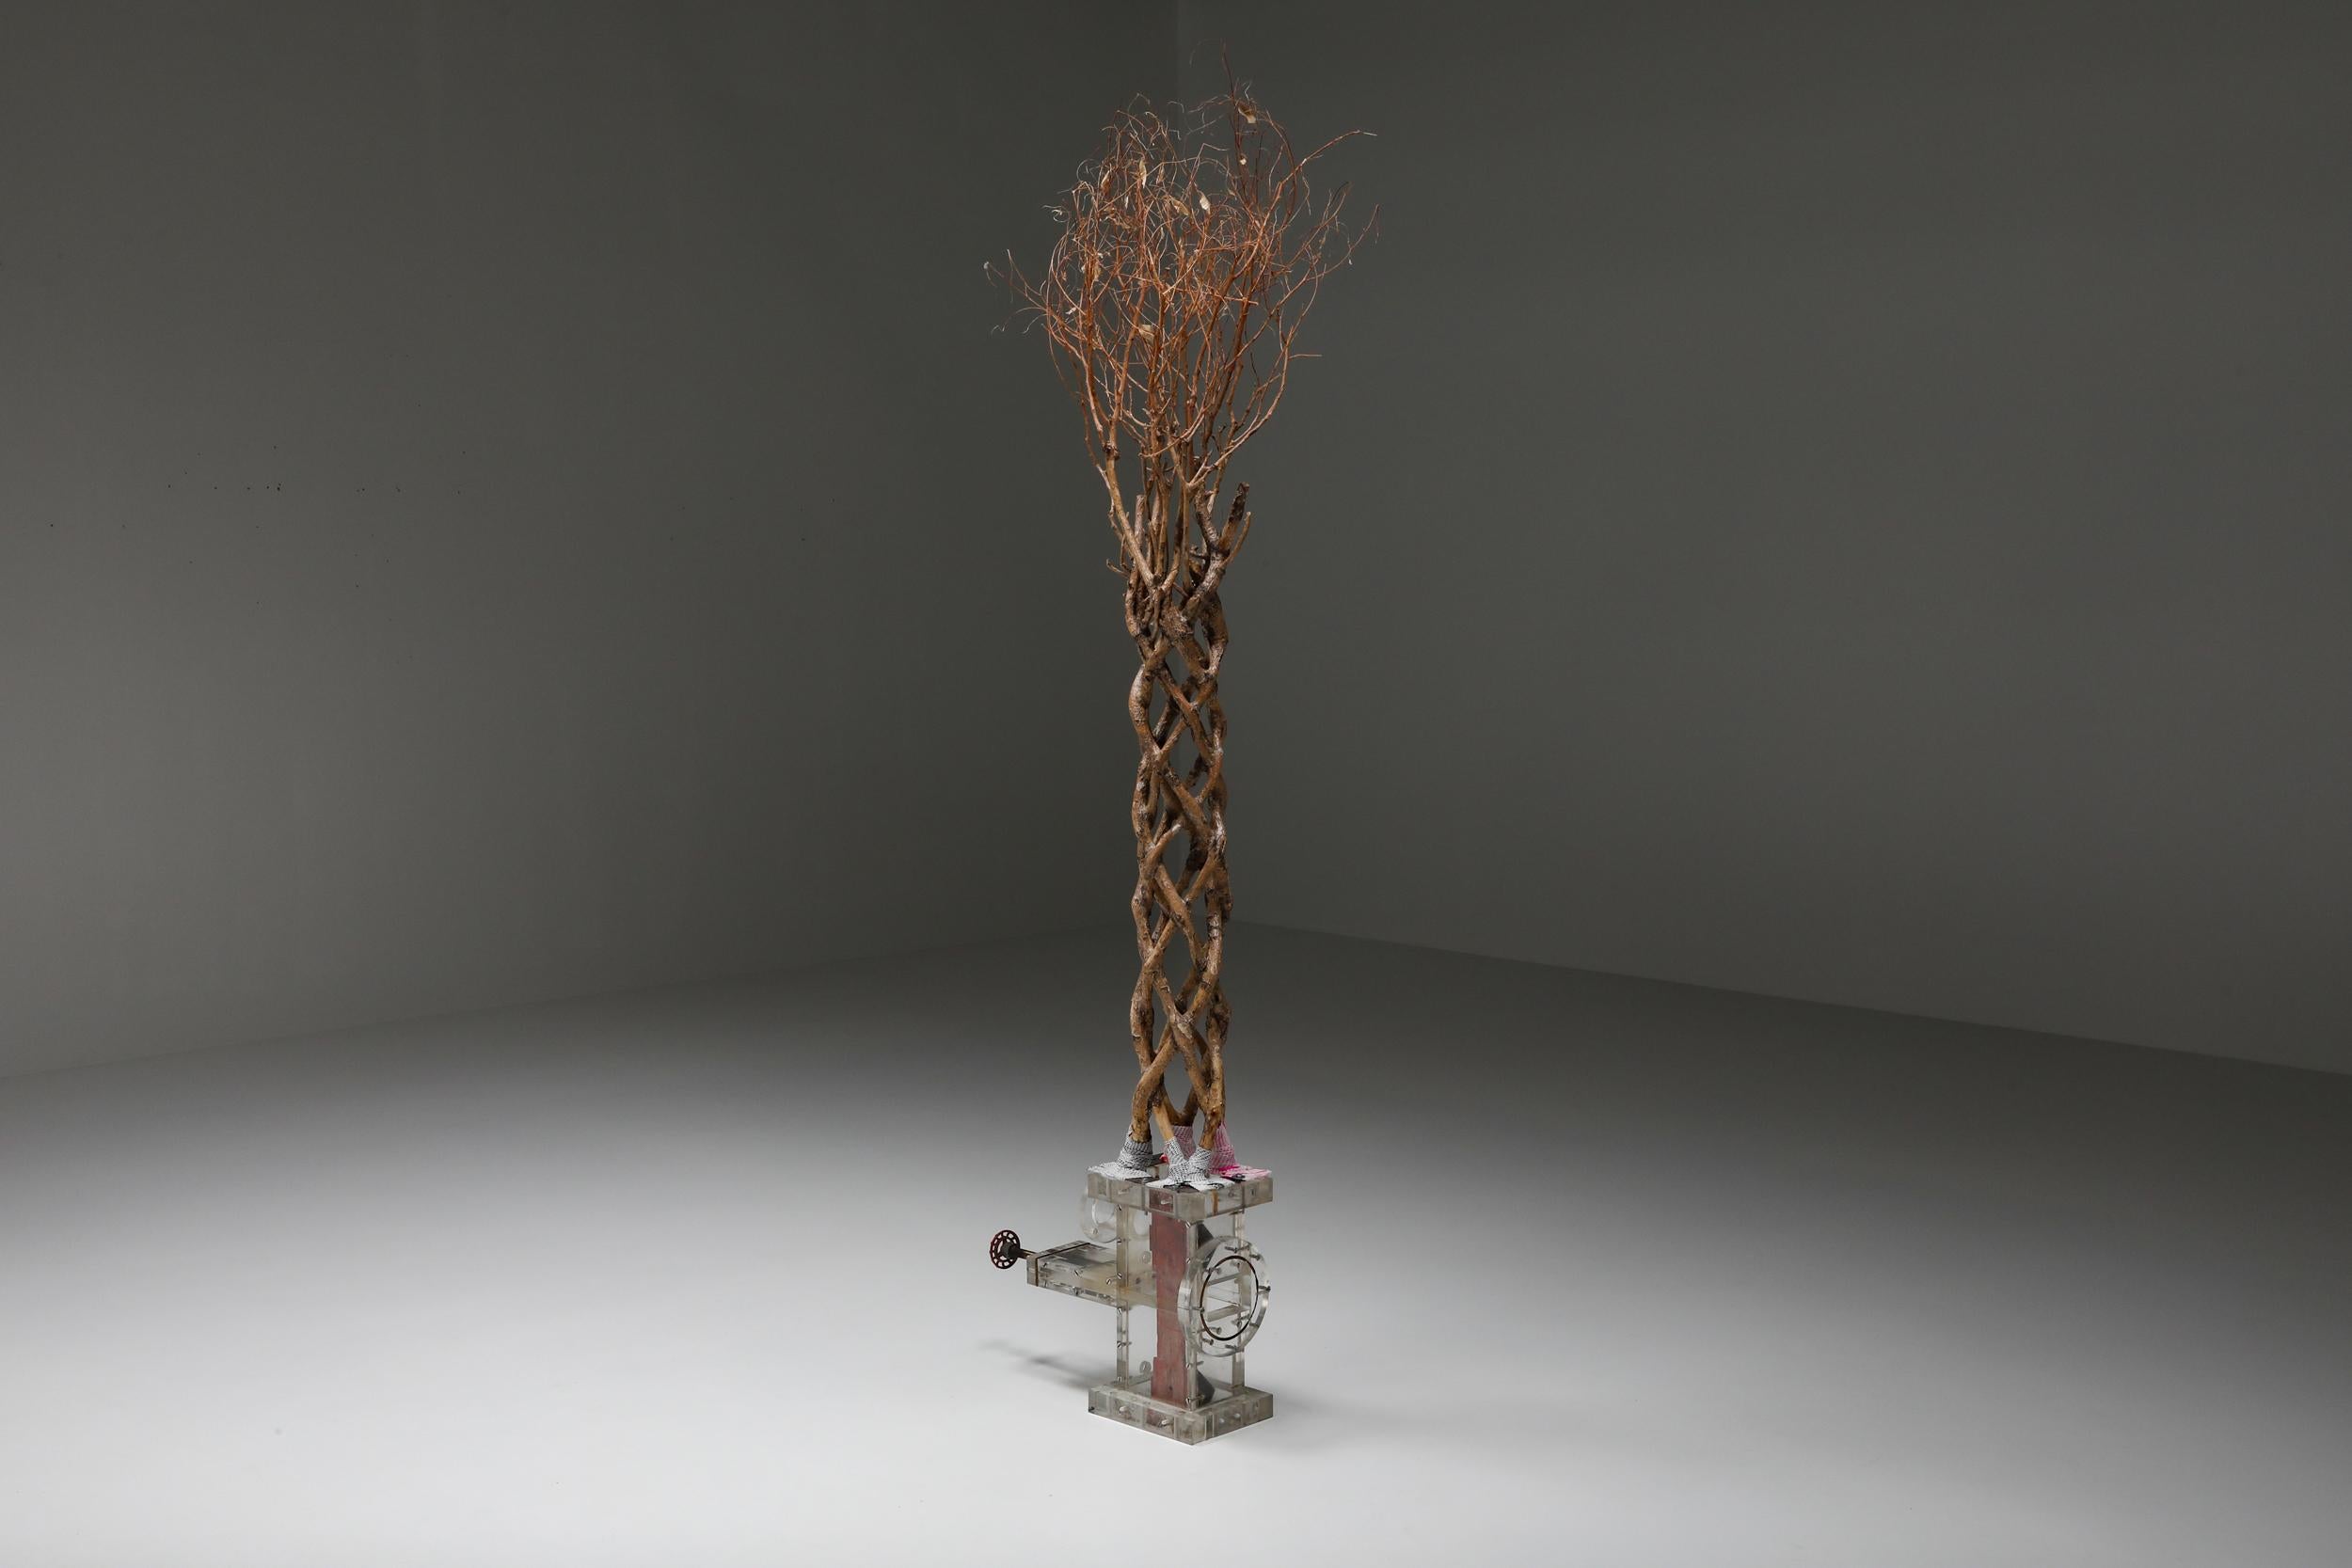 Organic Modern Contemporary Sculpture by Lionel Jadot 'Plexi Tree' Belgian Art and Design Basel For Sale